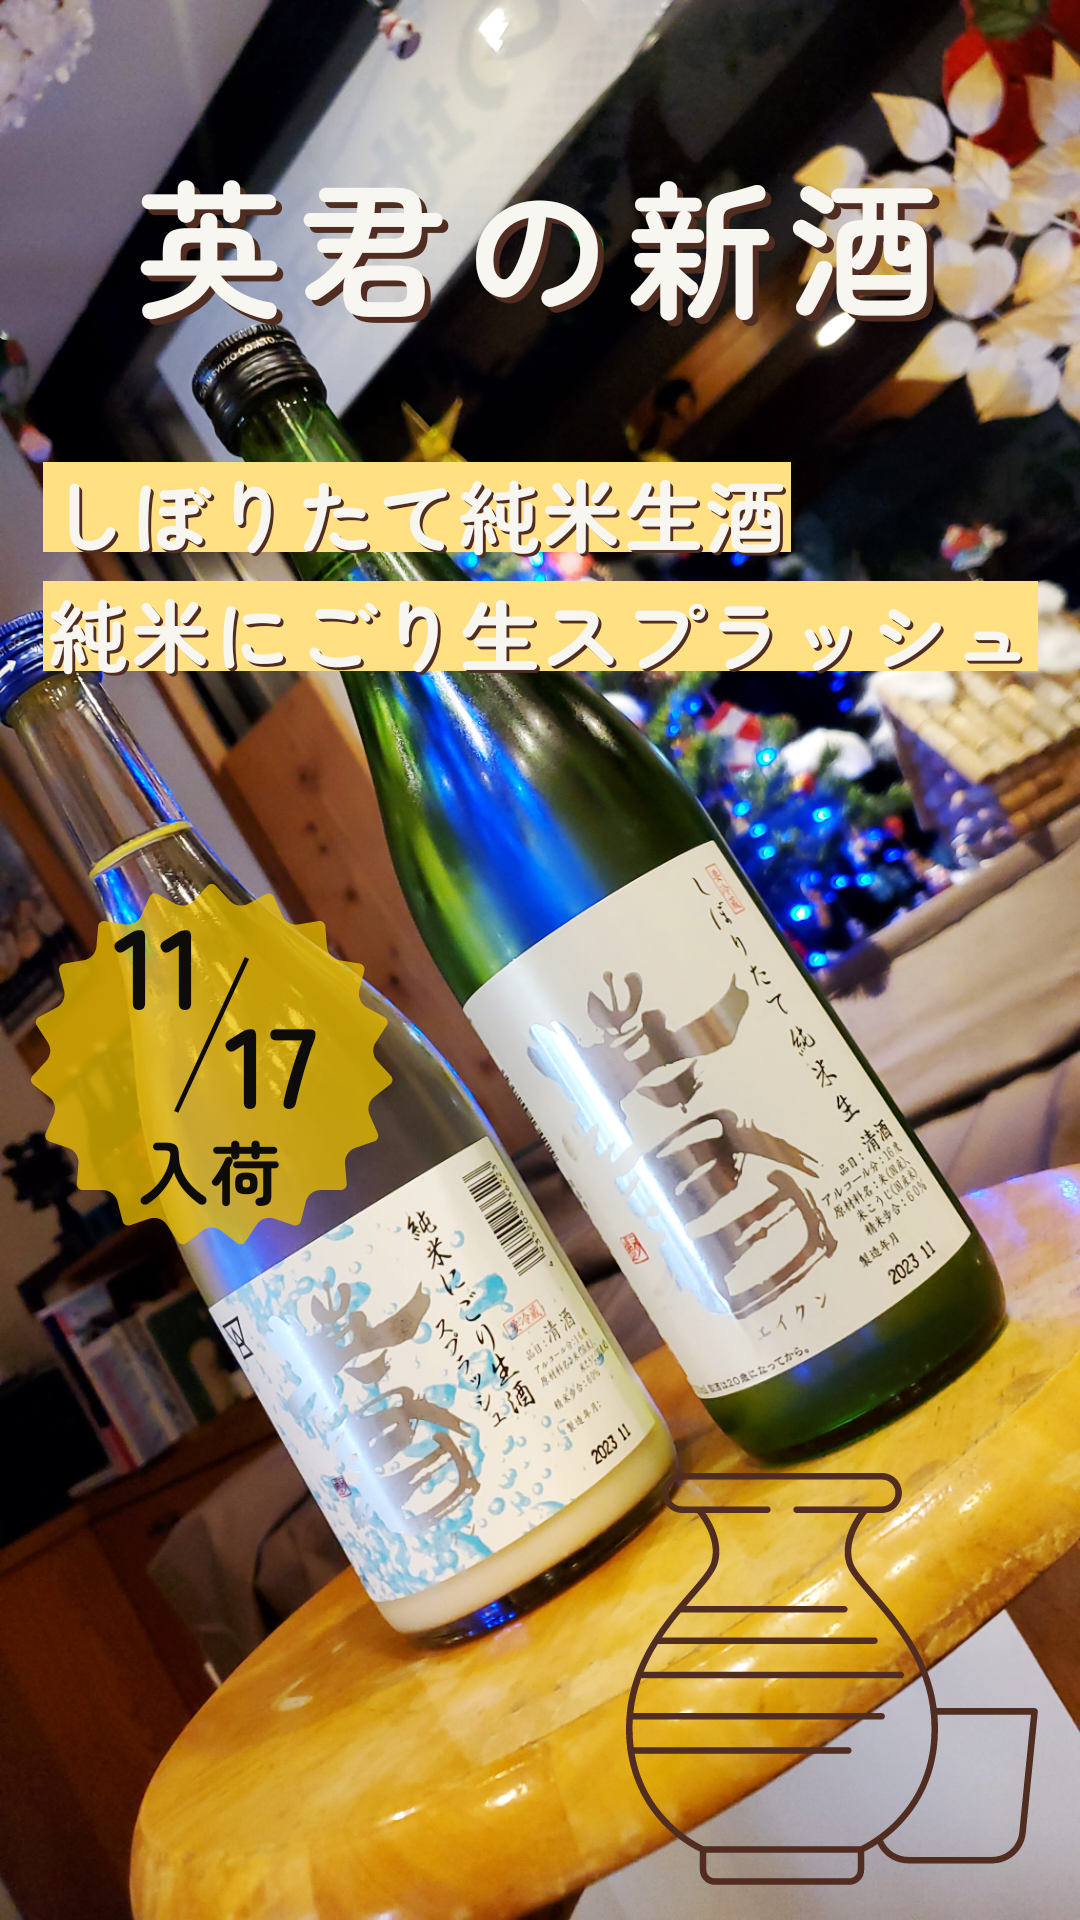 You are currently viewing 英君酒造の新酒弐itemご案〜内